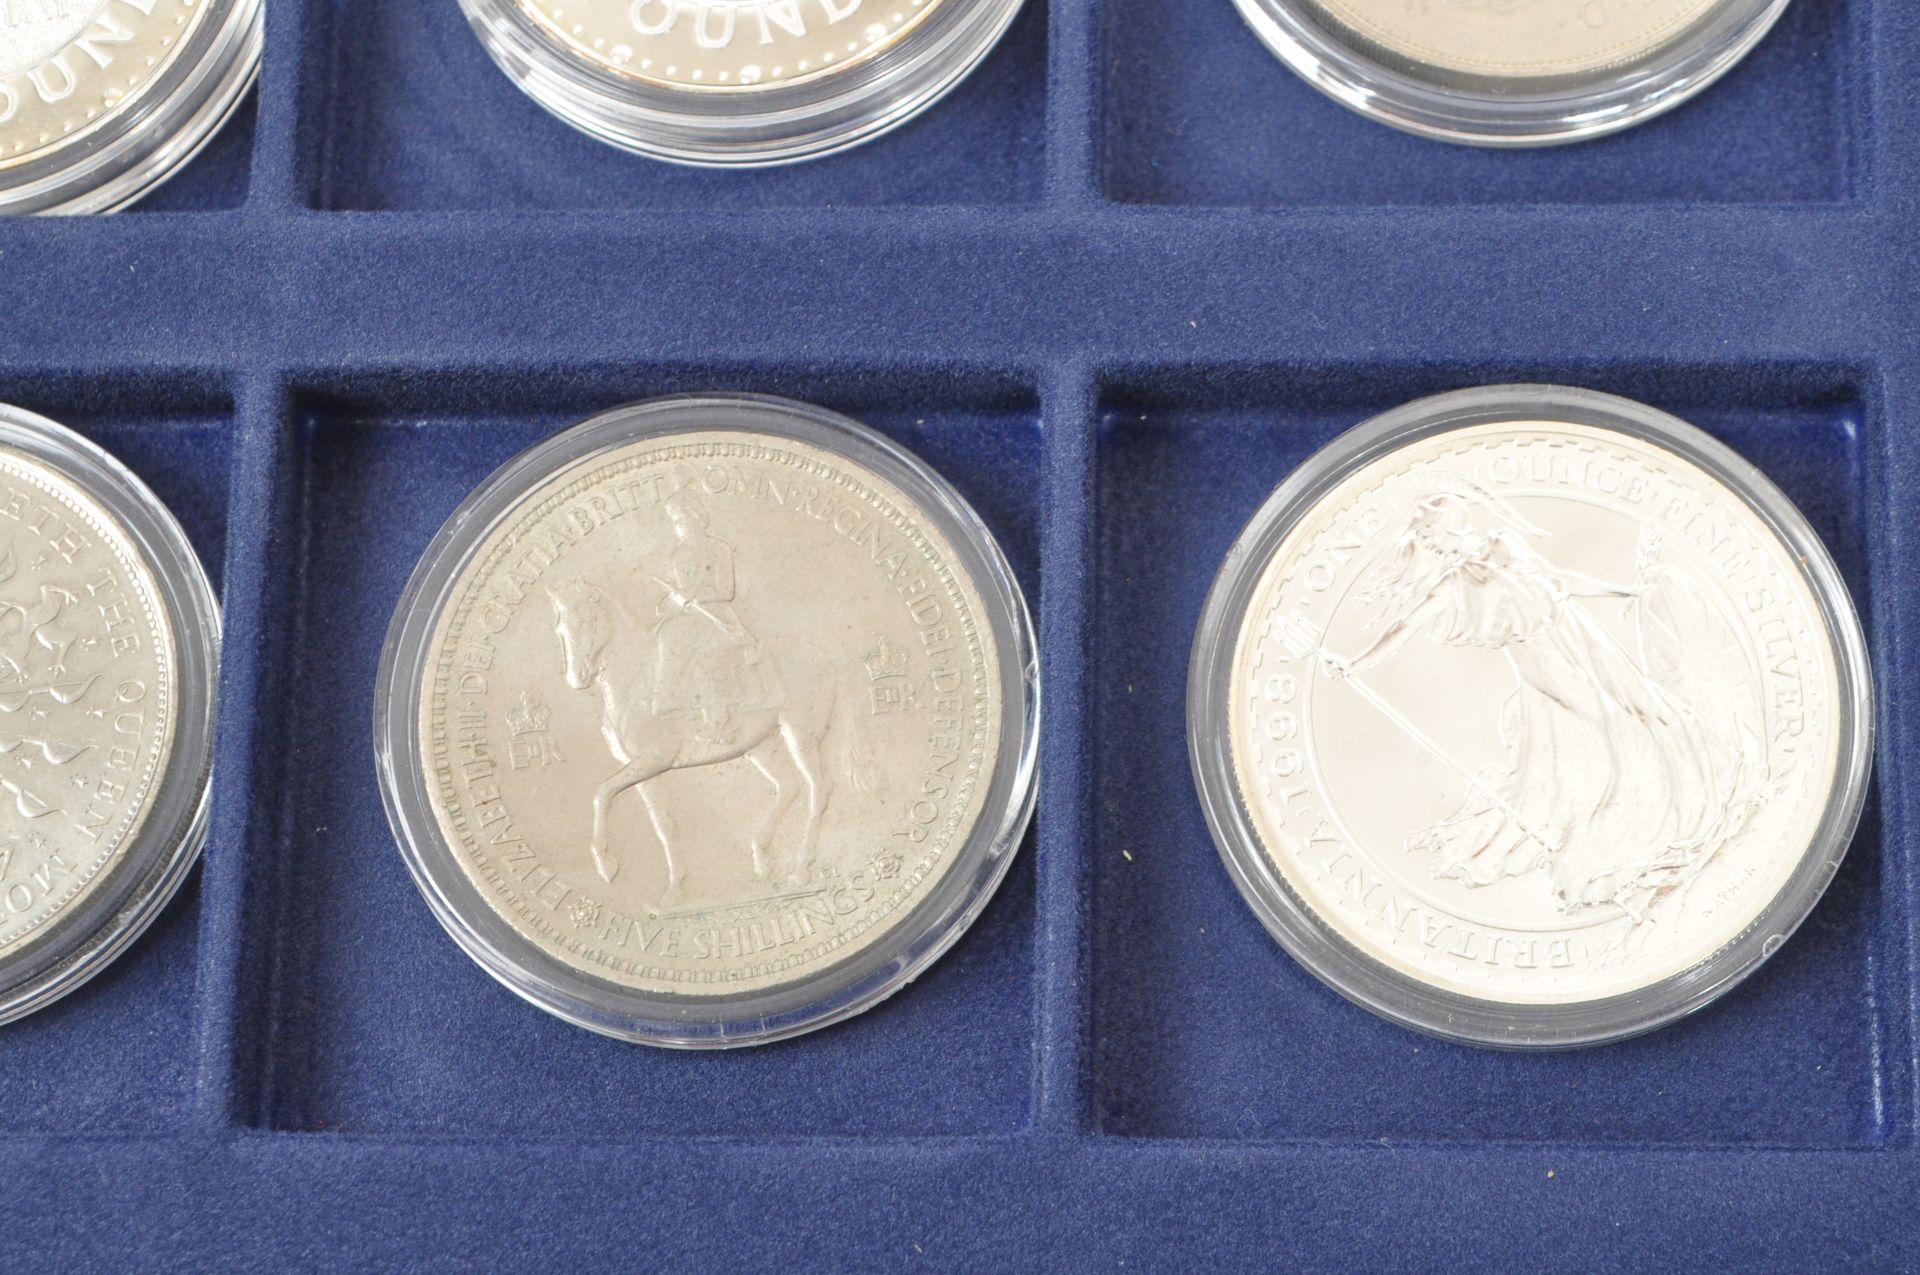 WESTMINSTER MINT - COLLECTION OF SILVER PROOF COINS - Image 8 of 8